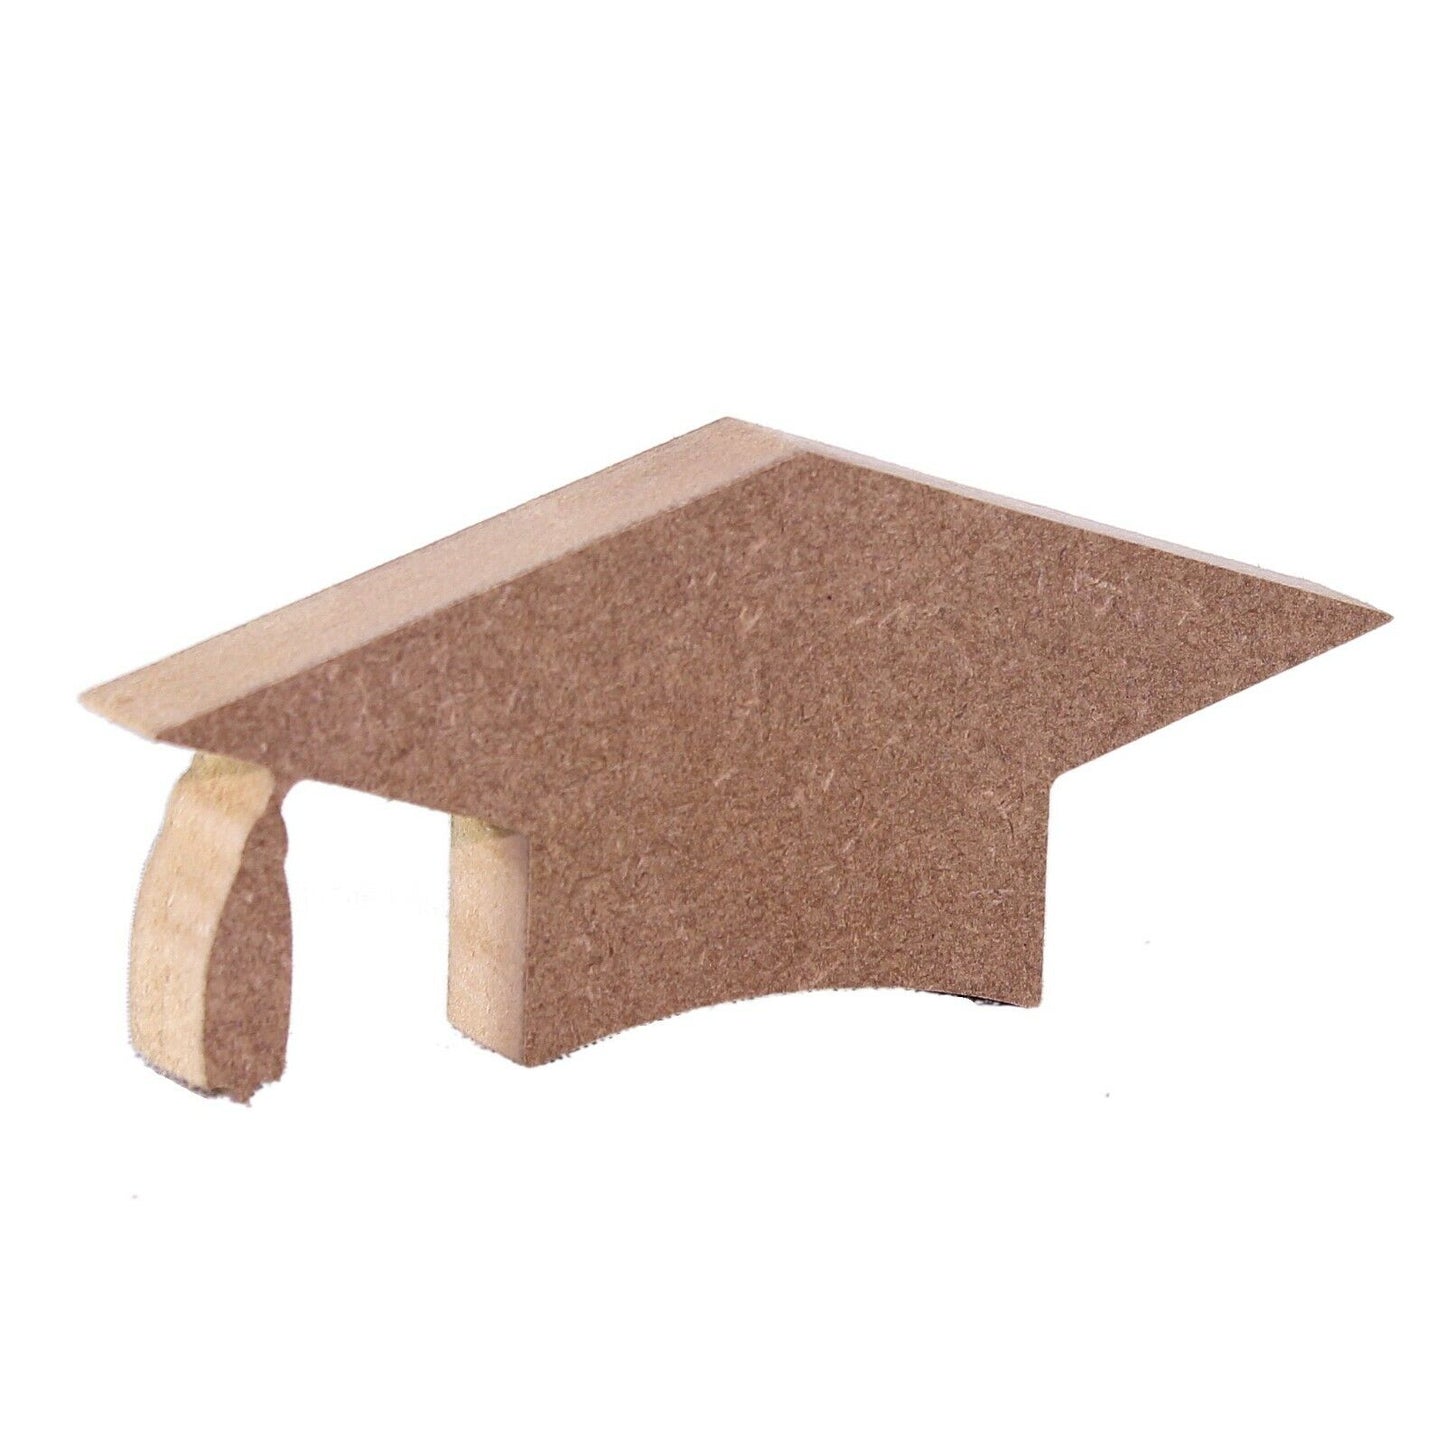 Free Standing 18mm MDF Graduation Cap Craft Shape Various Sizes. Mortarboard